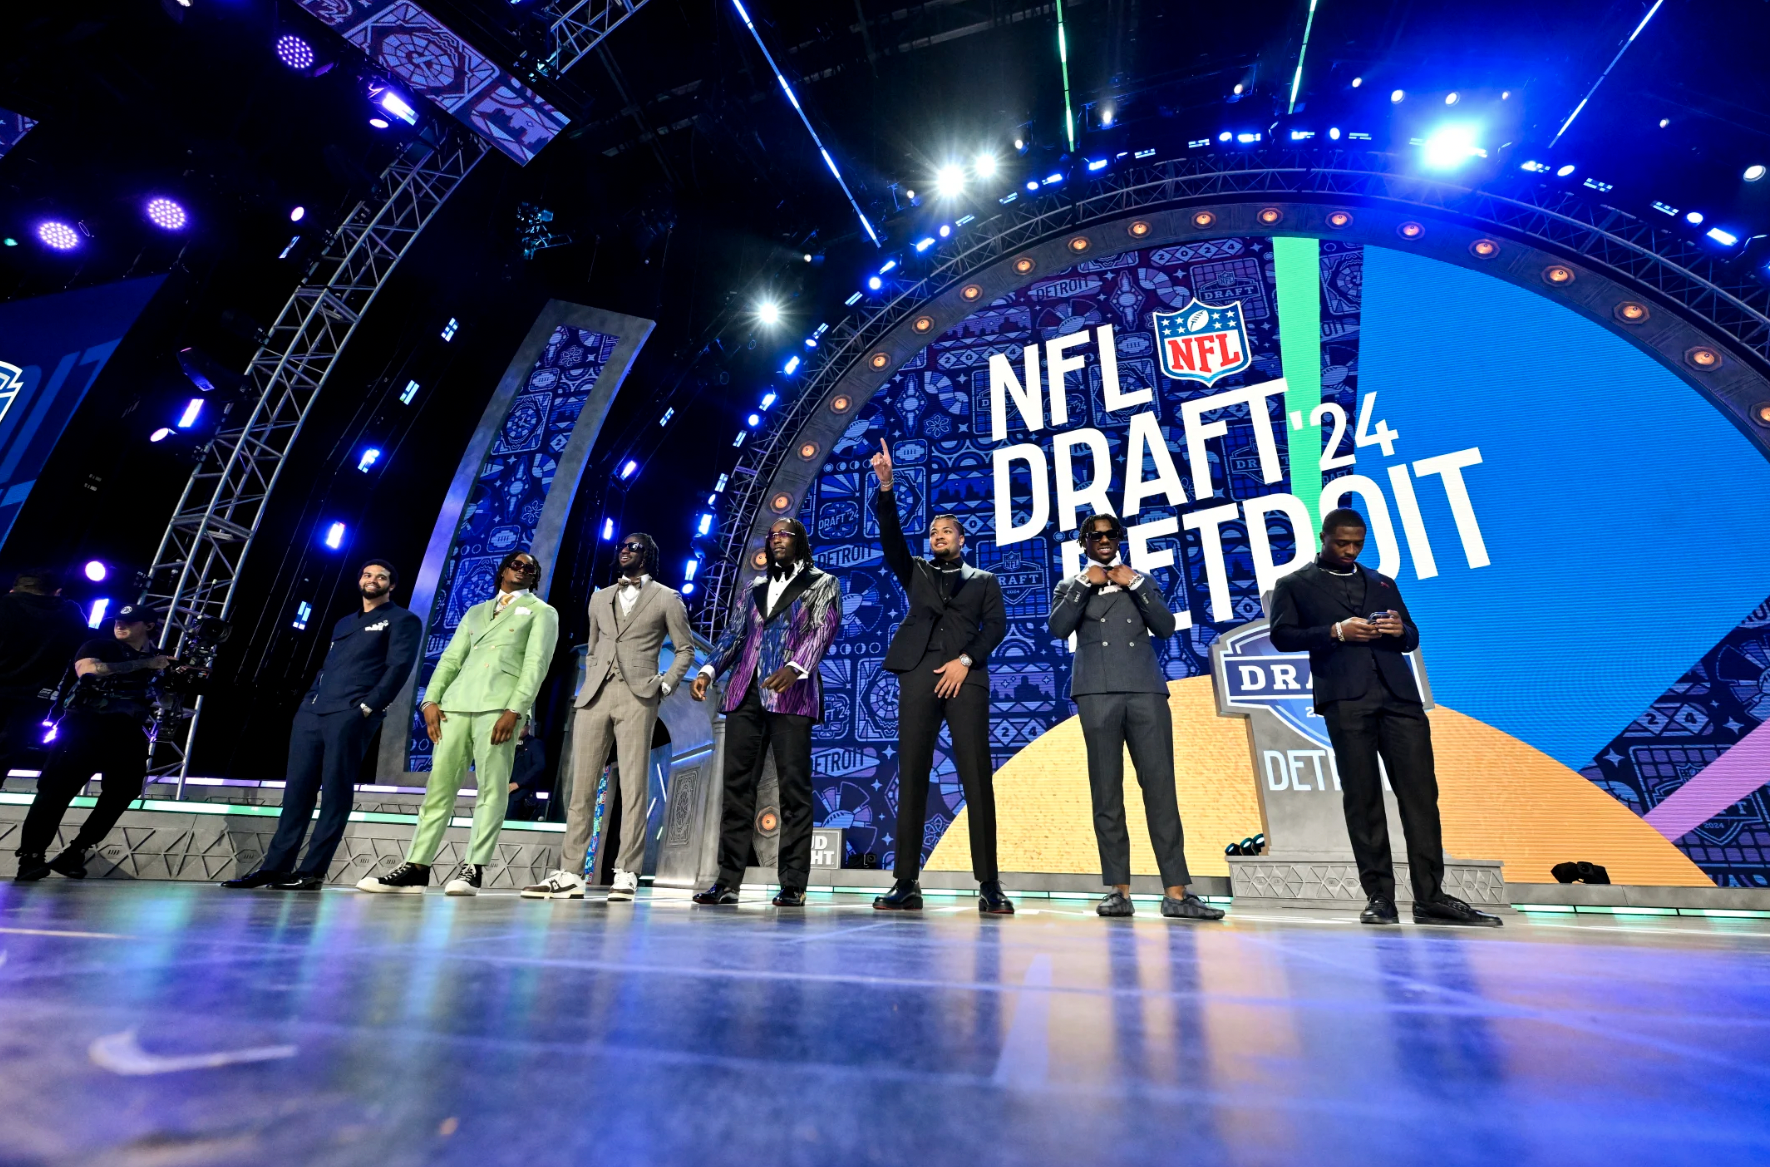 Seattle Athletes in High Demand at This Year’s NFL Draft